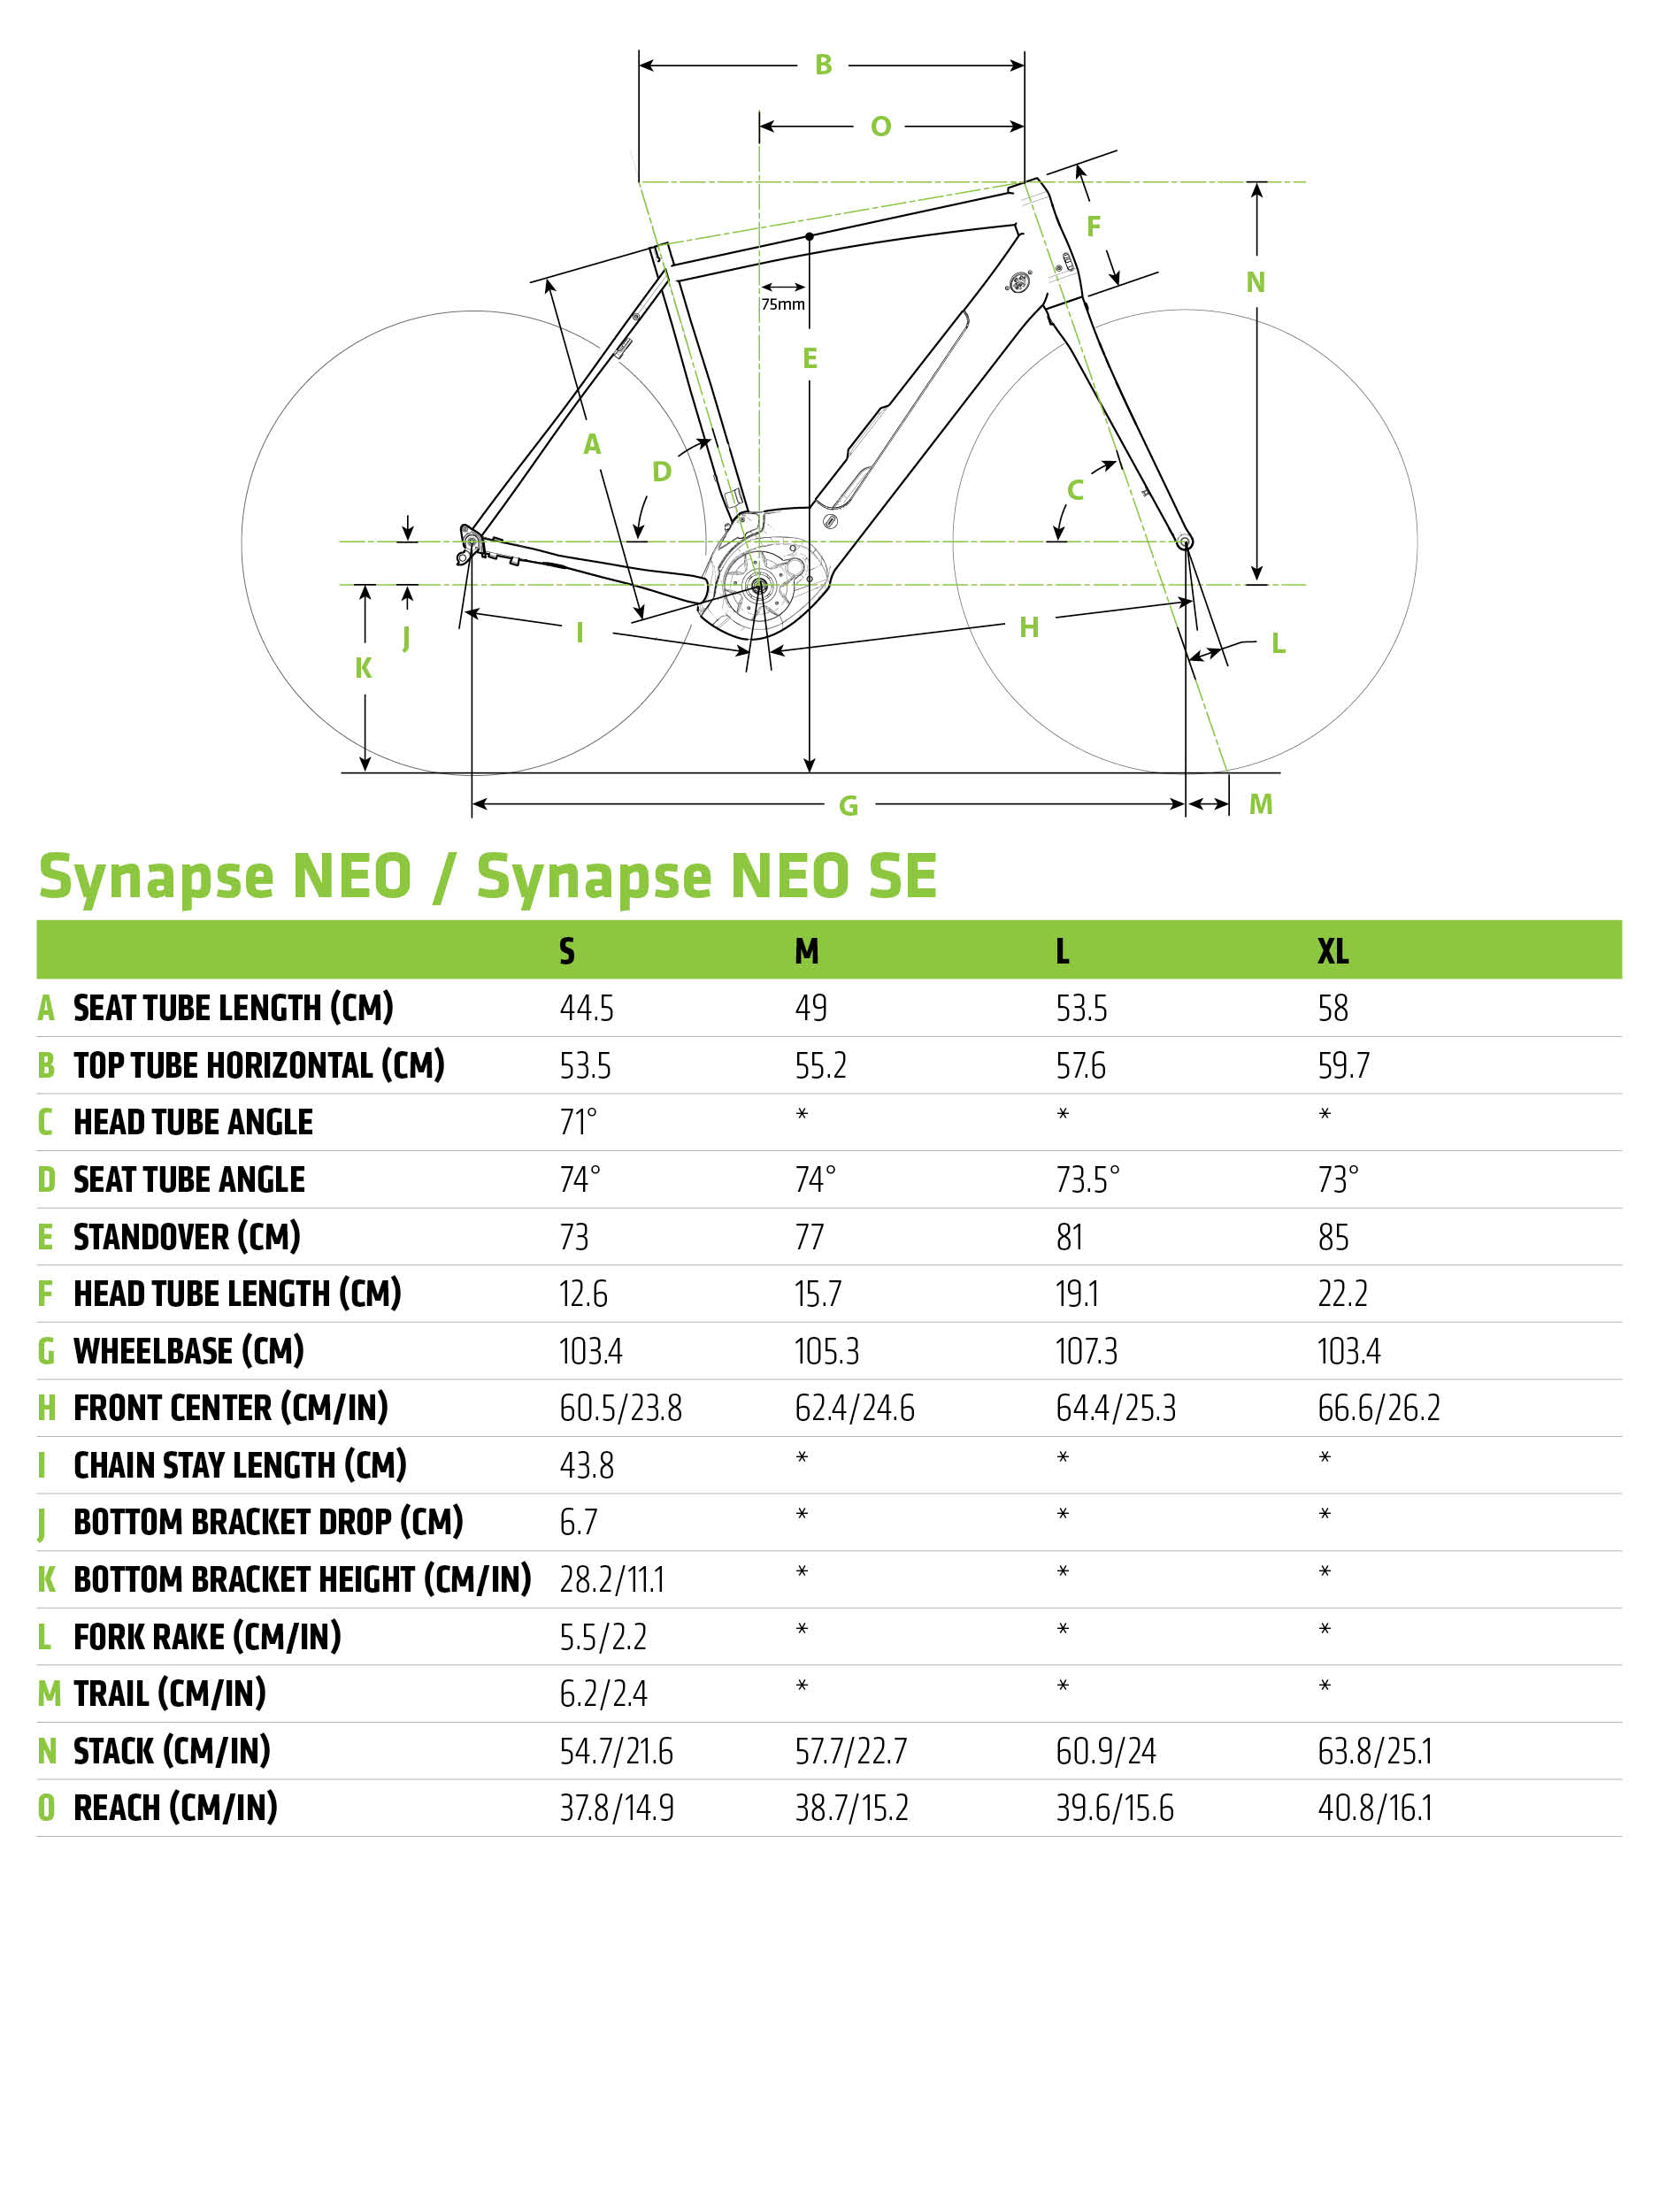 Cannondale Synapse Neo 2 geometry chart